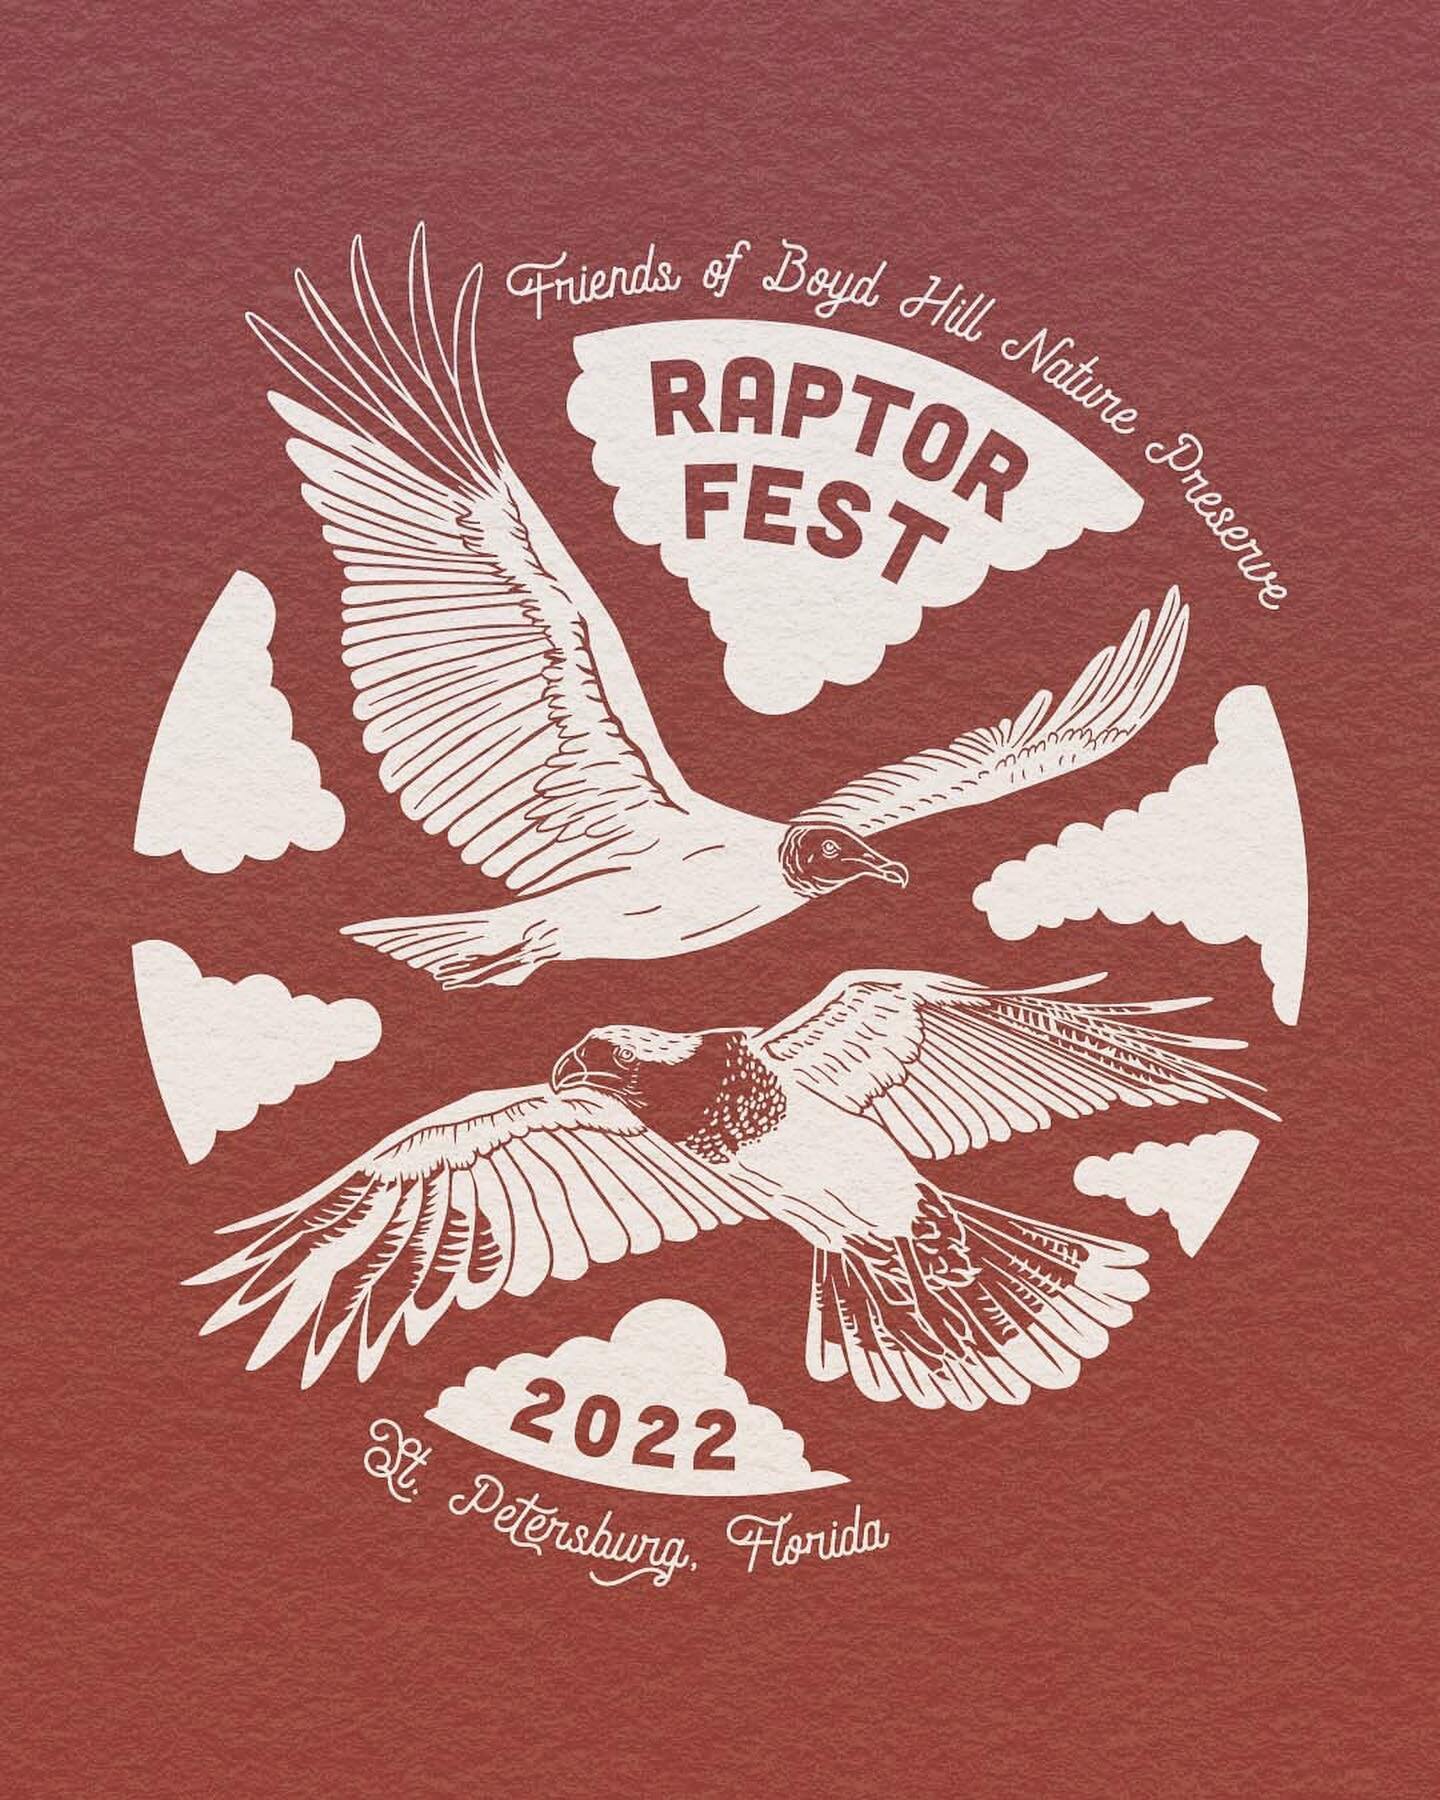 Life has been very busy lately, but there has been some fun! Illustrated @friendsofboydhill 9th annual Raptor Fest shirts! So honored to be a part of the Friends and help put on a great event this year. 🦅🦉
&bull;
&bull;
&bull;
#keepstpetewild #rapt